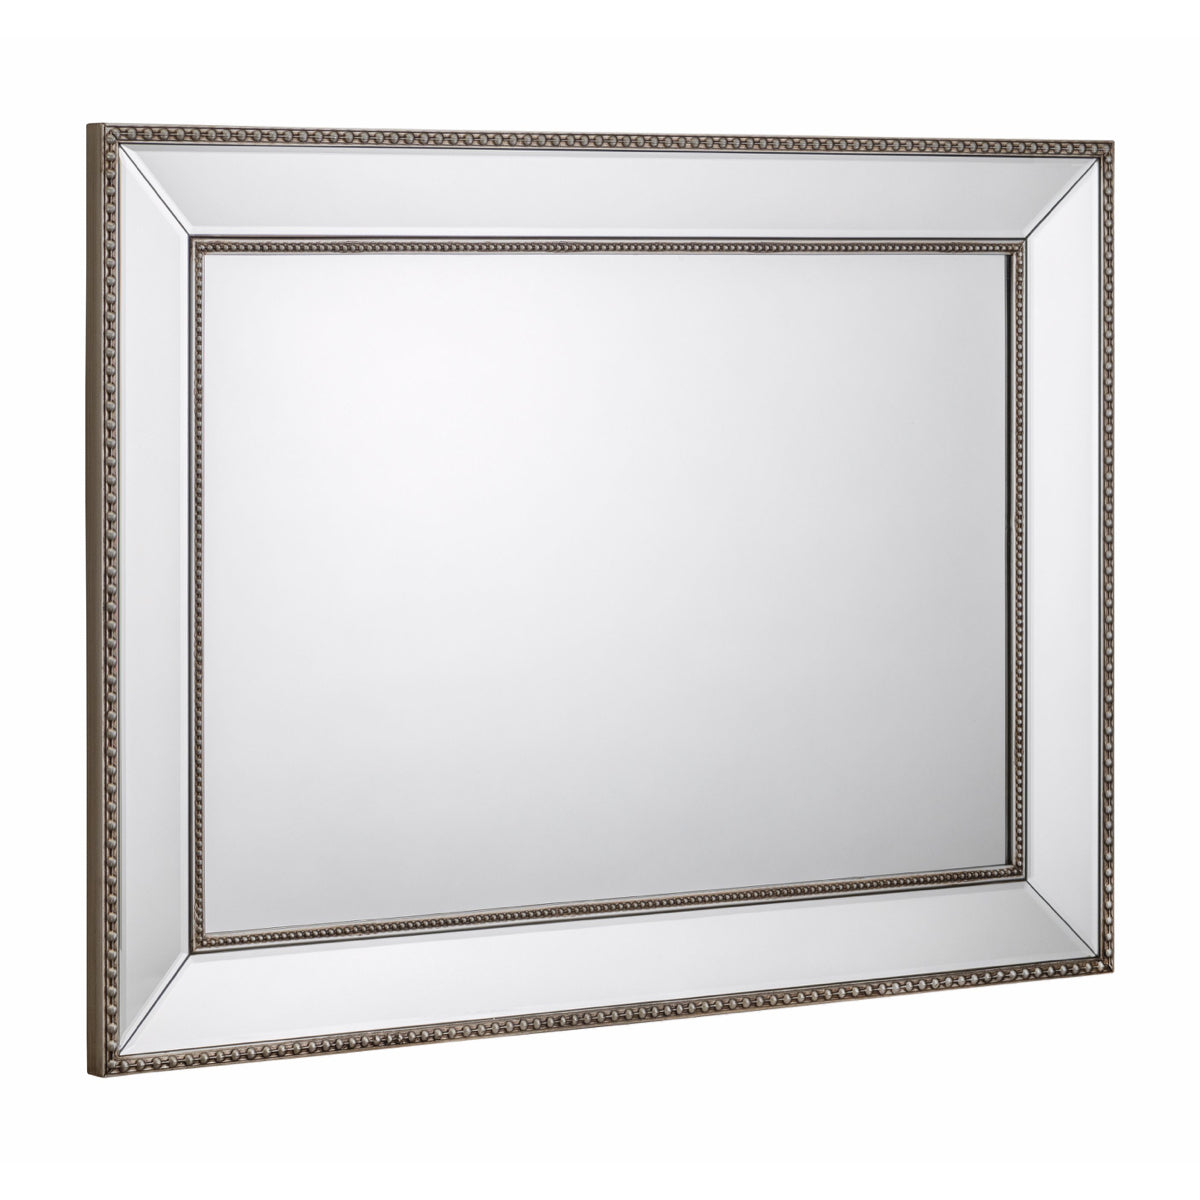 Julian Bowen, Symphony Beaded Wall Mirror, Pewter With Bevelled Glass